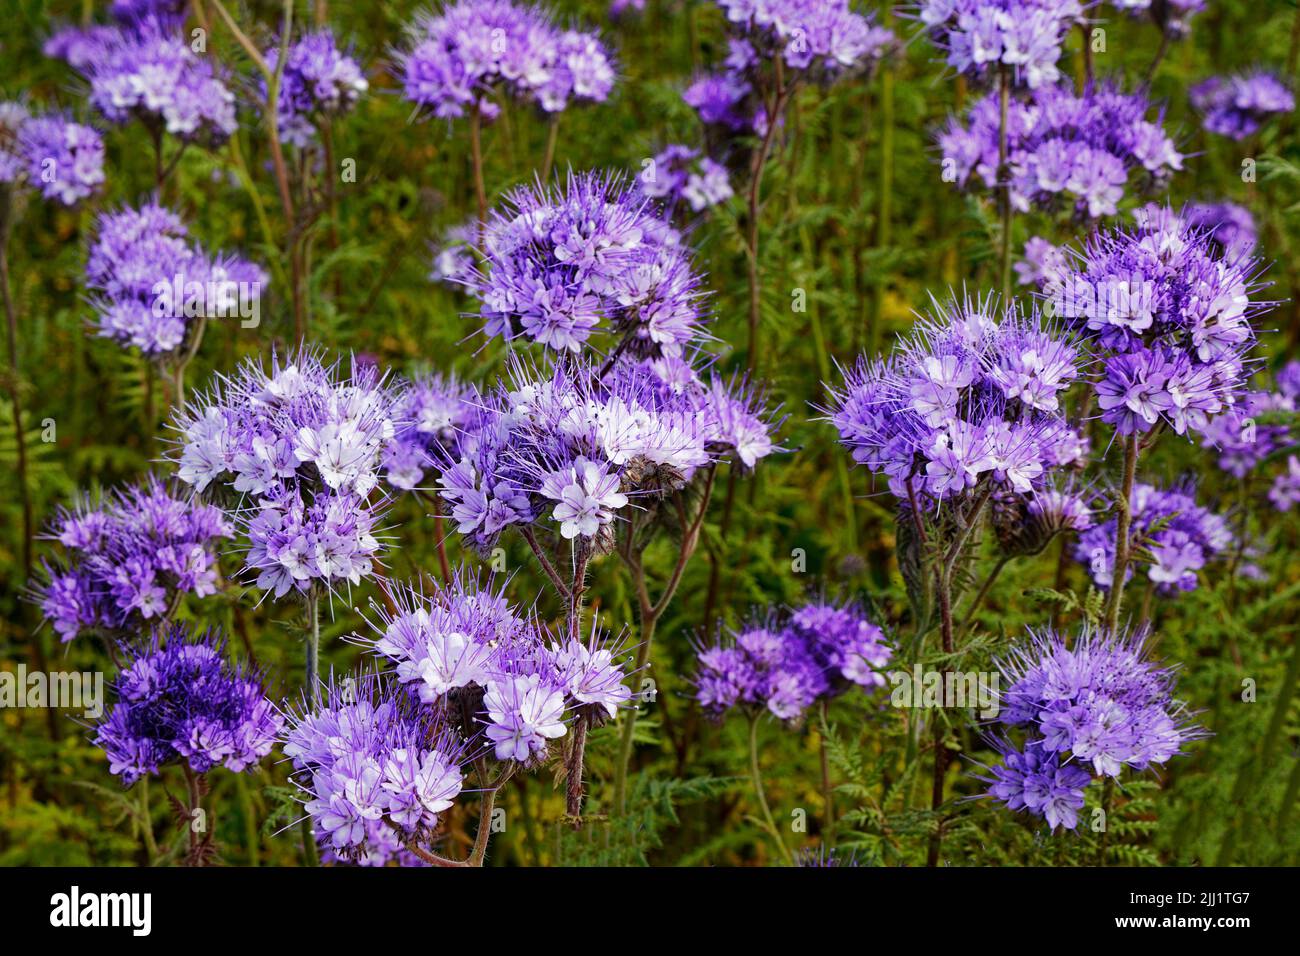 BLUE OR PURPLE TANSY PLANTS AND FLOWERS Phacelia tanacetifolia IN SUMMER Stock Photo